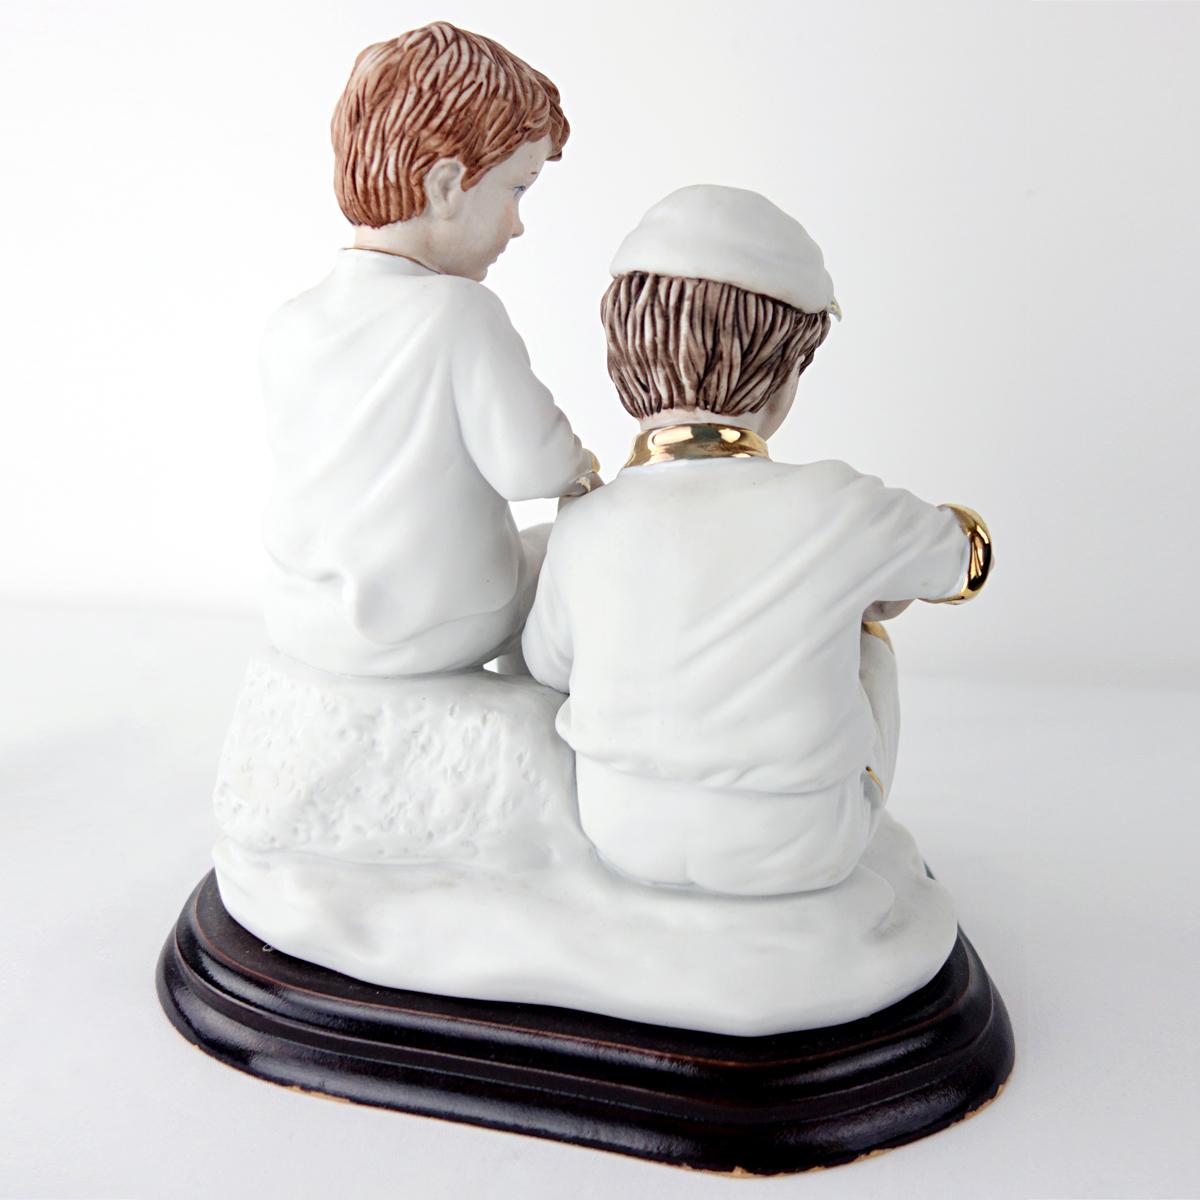 Biscuit Porcelain Statuette of Two Boys Eating a Melon with Gold-Colored Details For Sale 8